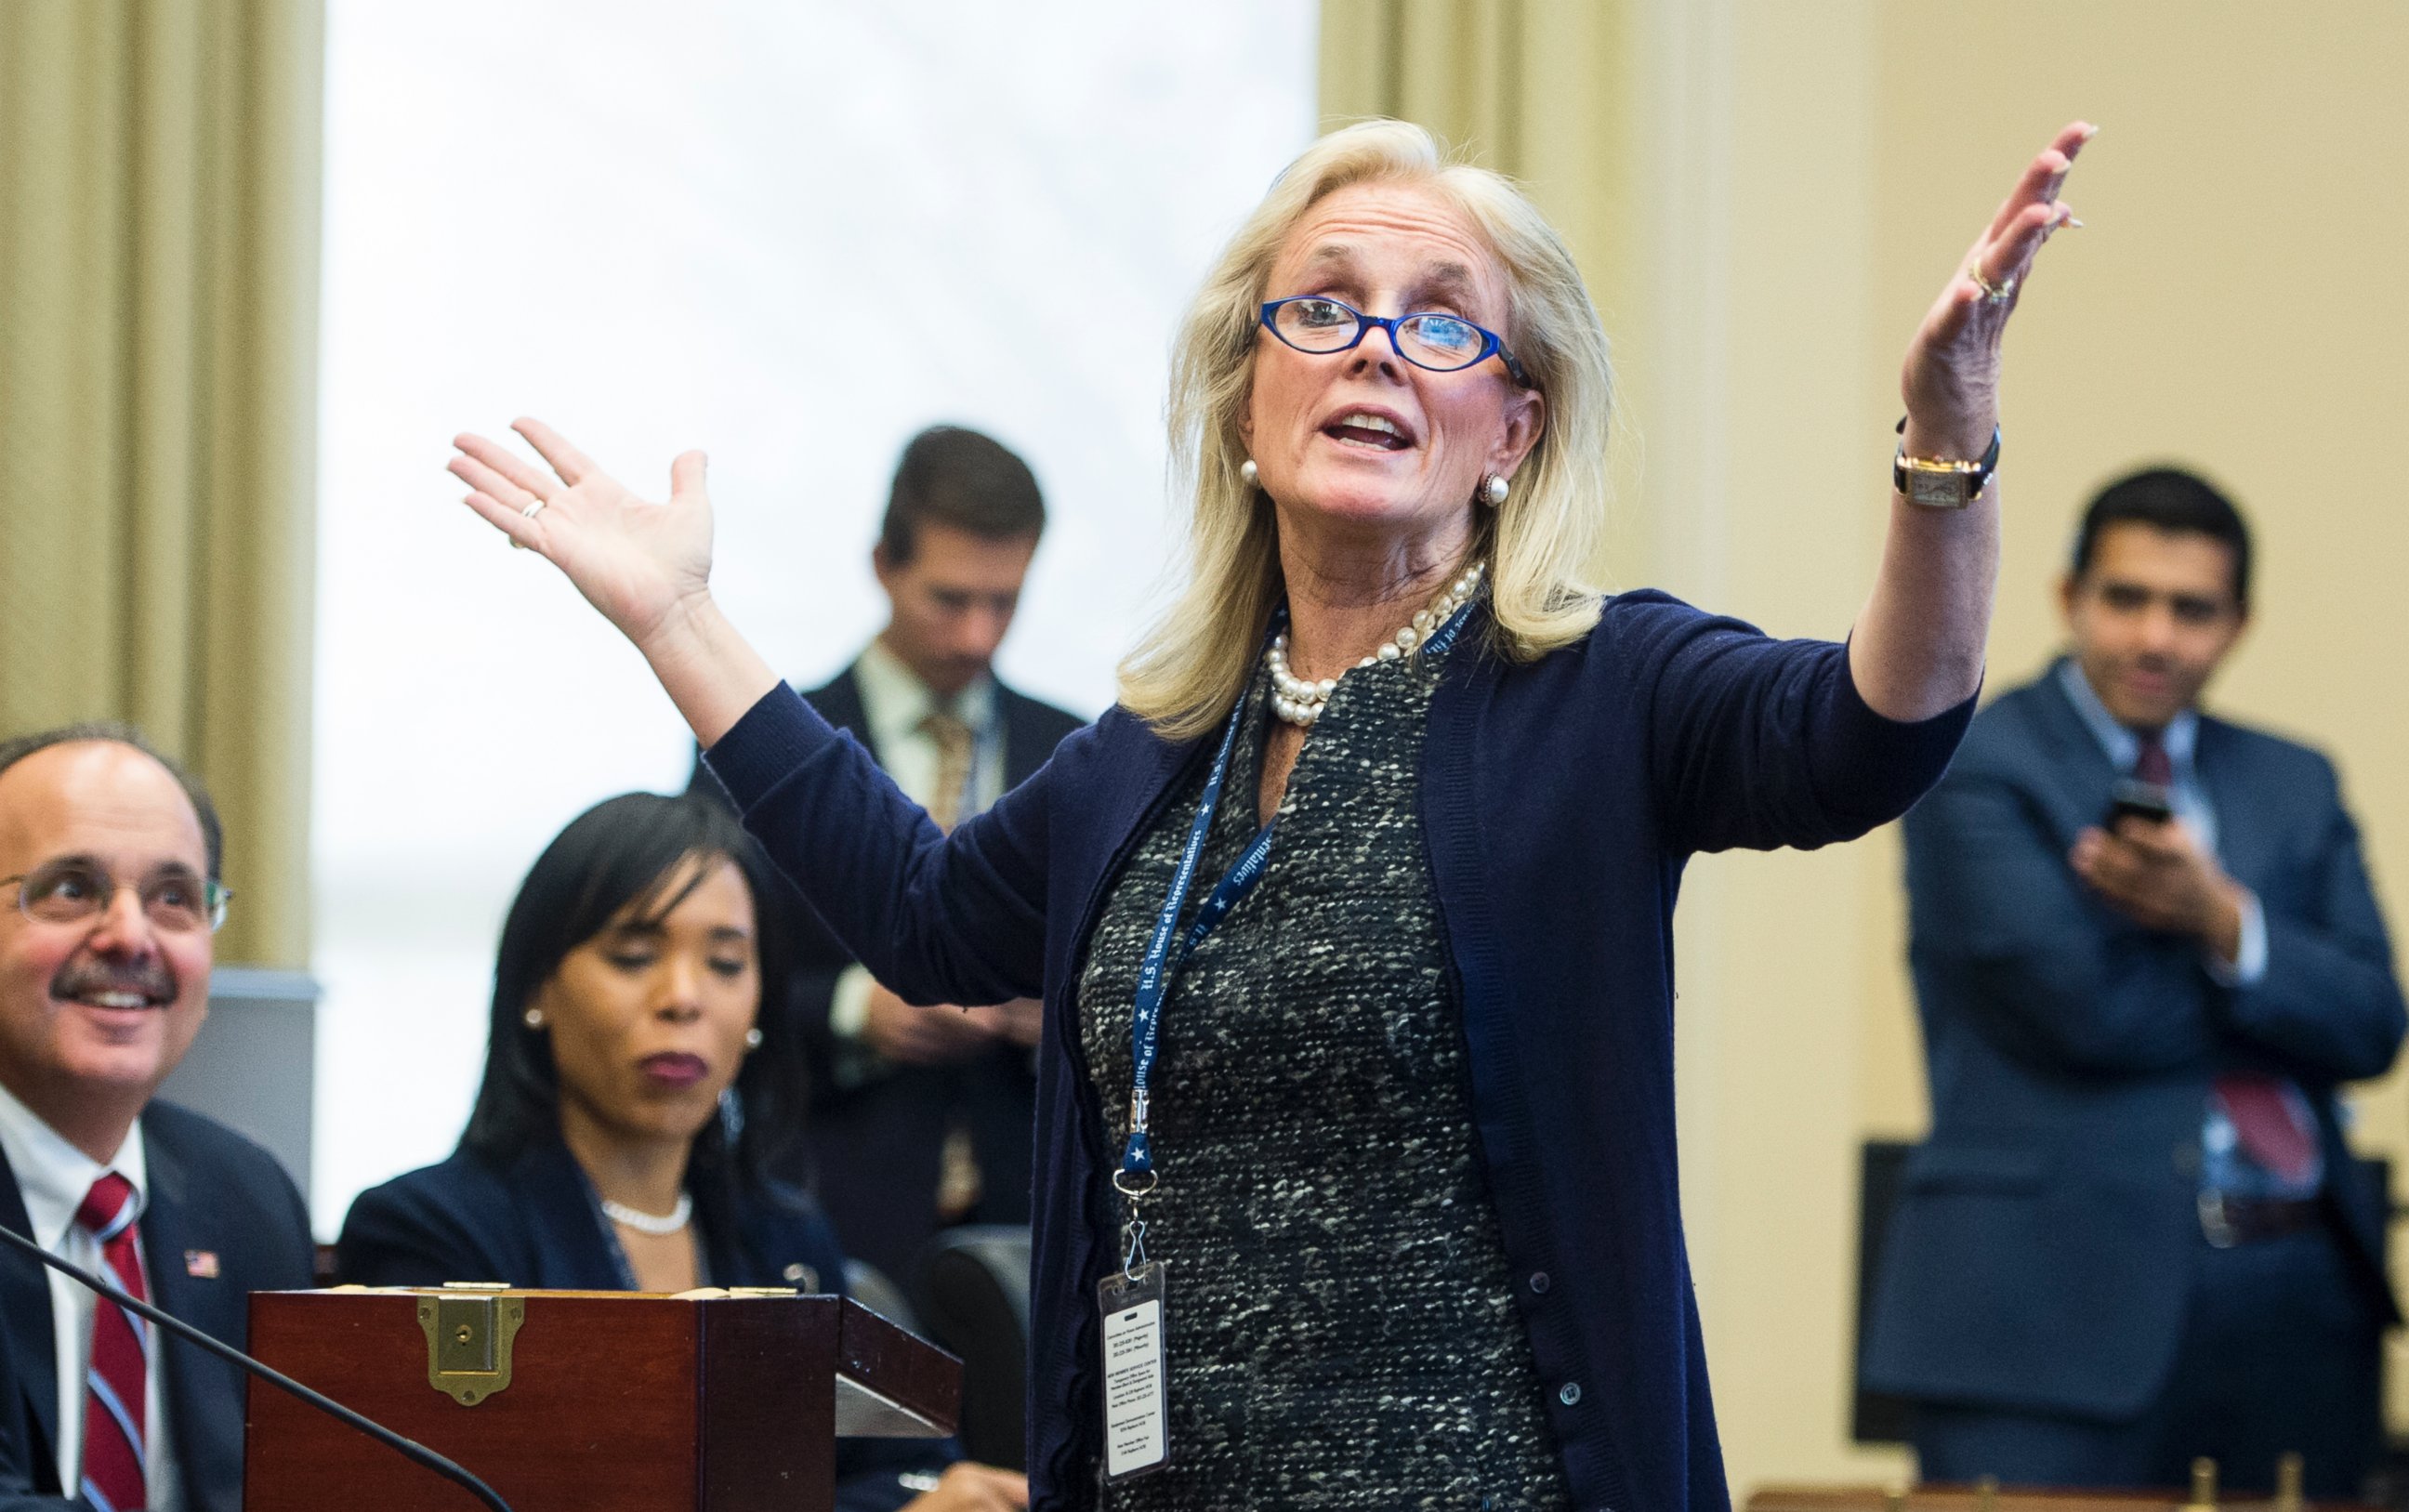 PHOTO: Rep.-Elect Debbie Dingell reacts after drawing the 40th pick in the room lottery draw for the incoming members of the 114th Congress on Nov. 19, 2014.